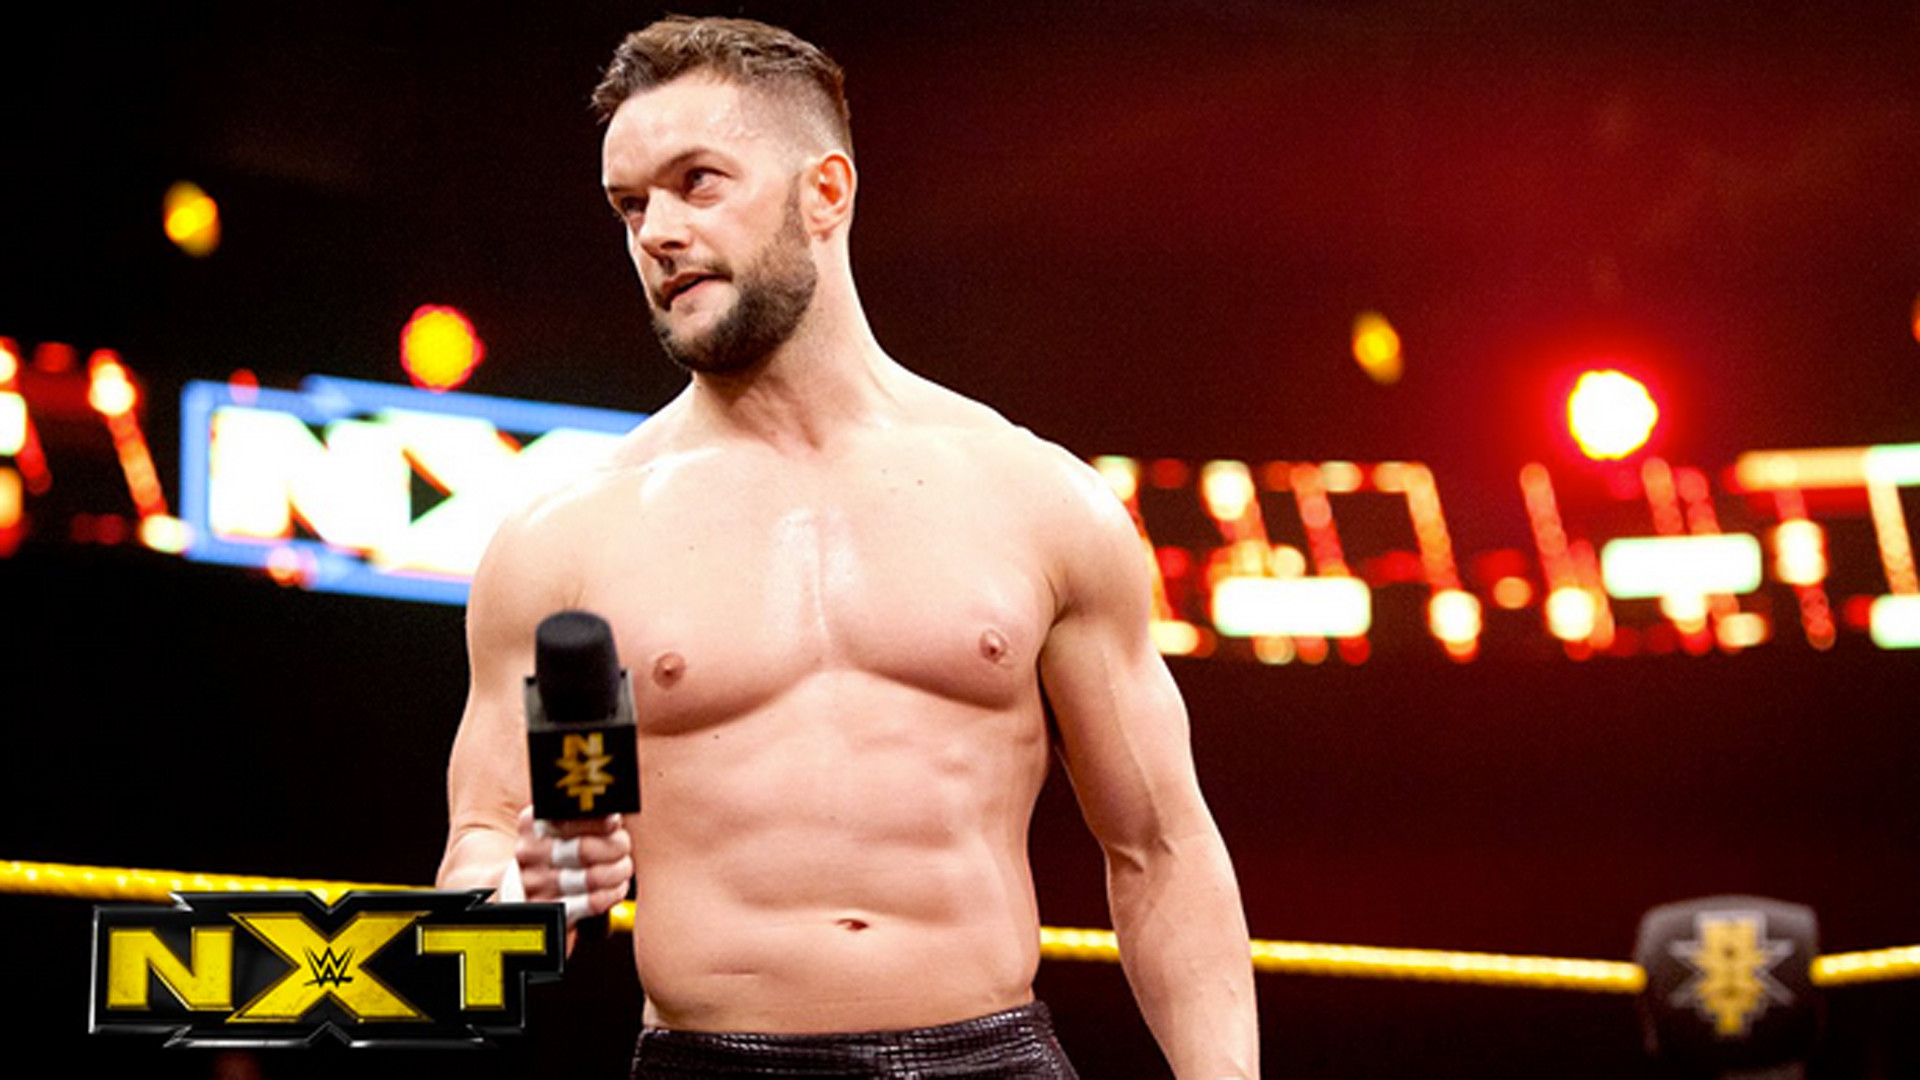 1920x1080 NXT champion Finn Balor helping 'Answer the Call' for families of fallen  NYC heroes | WWE | Sporting News